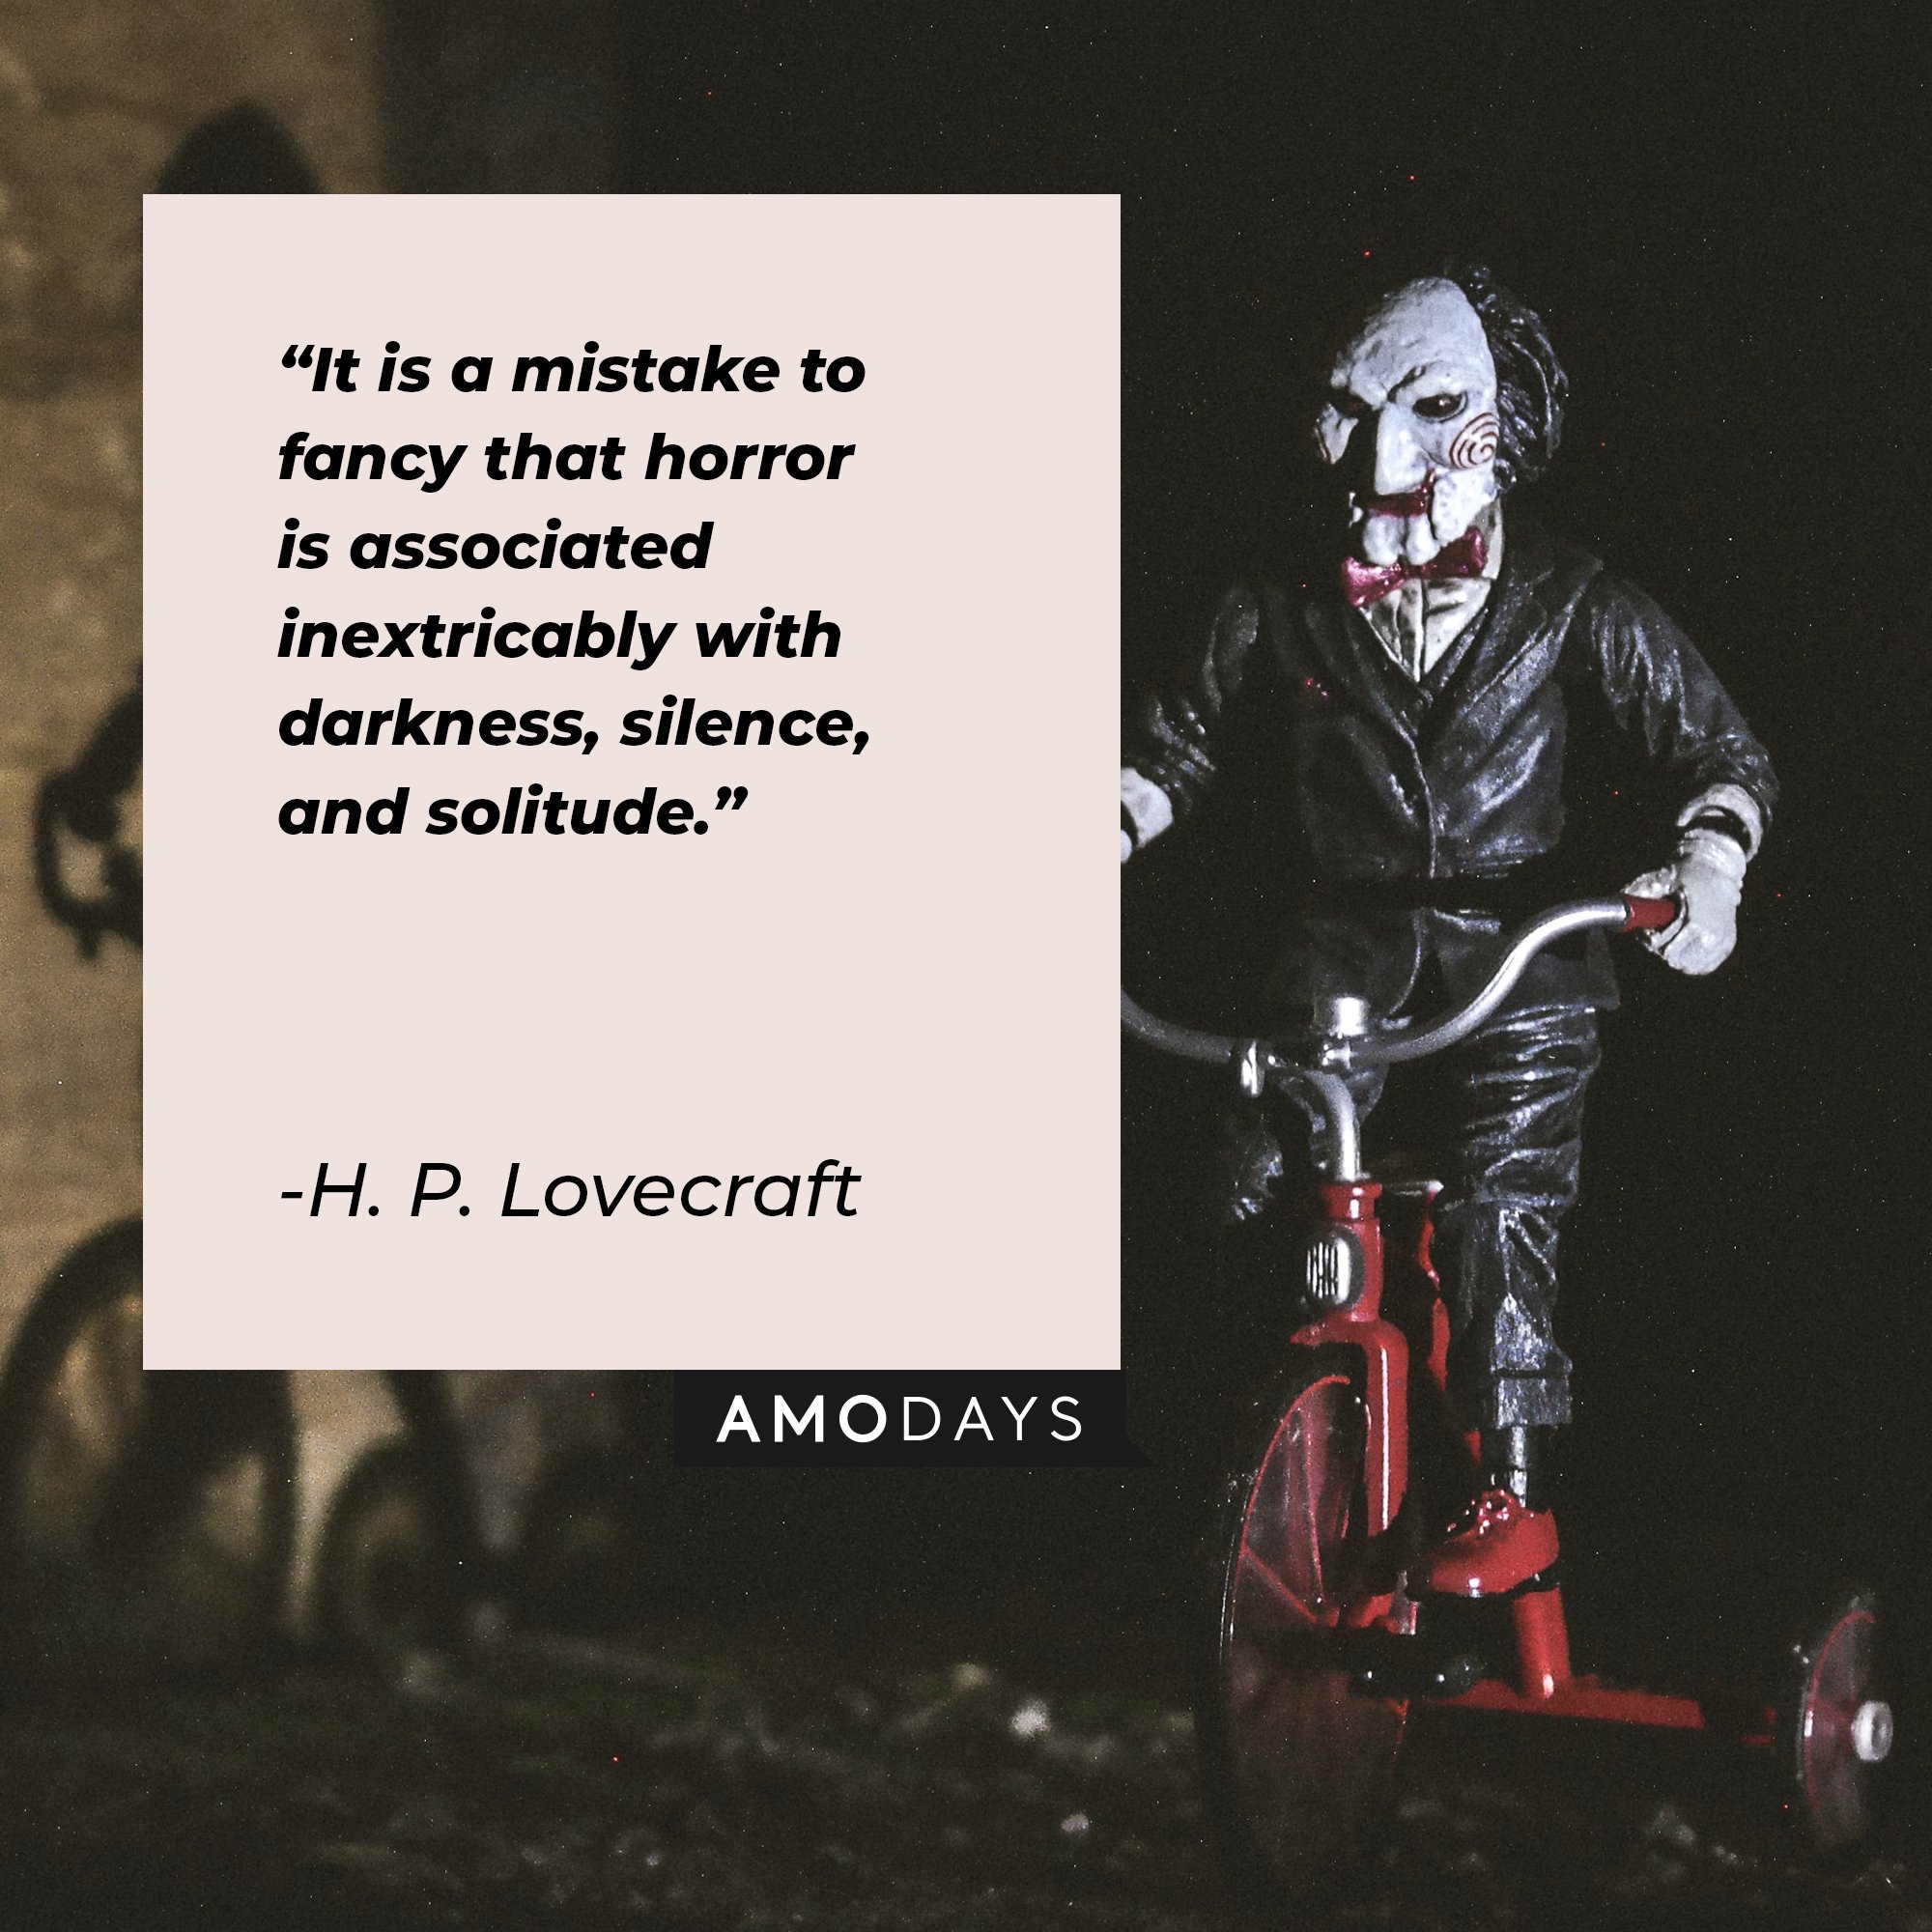 H. P. Lovecraft’s quote: "It is a mistake to fancy that horror is associated inextricably with darkness, silence, and solitude." | Image: AmoDays